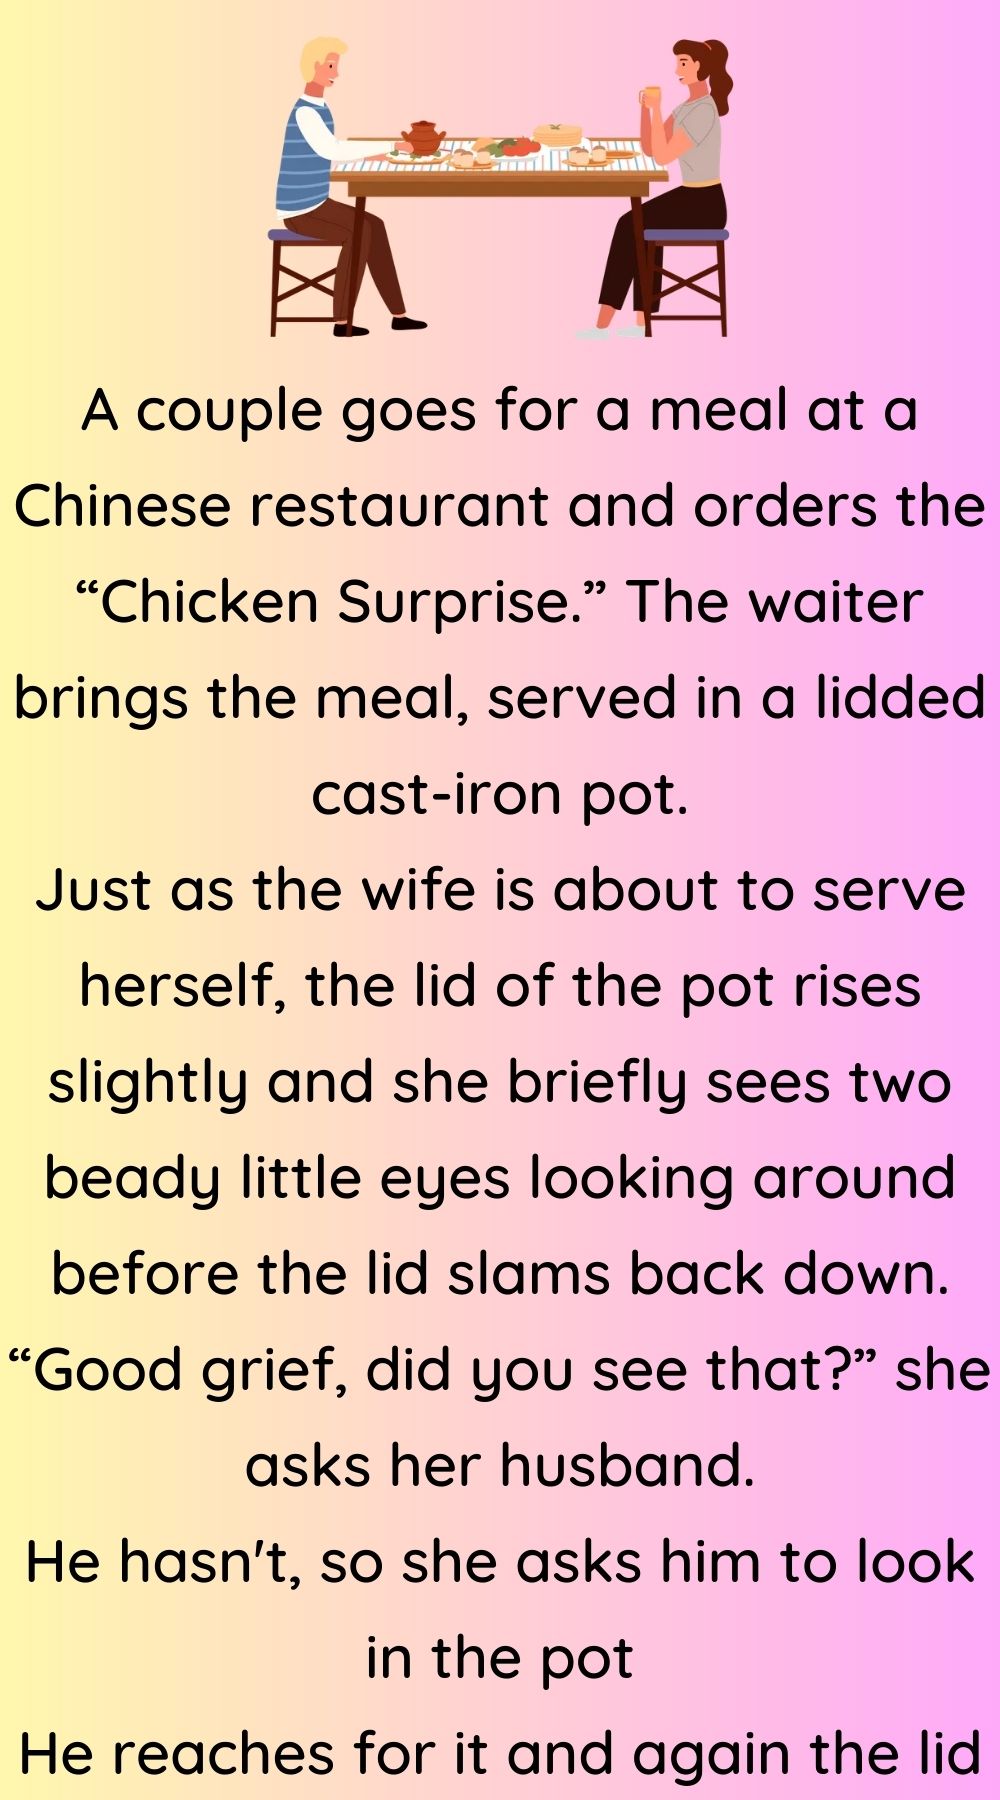 A couple goes for a meal at a Chinese restaurant 